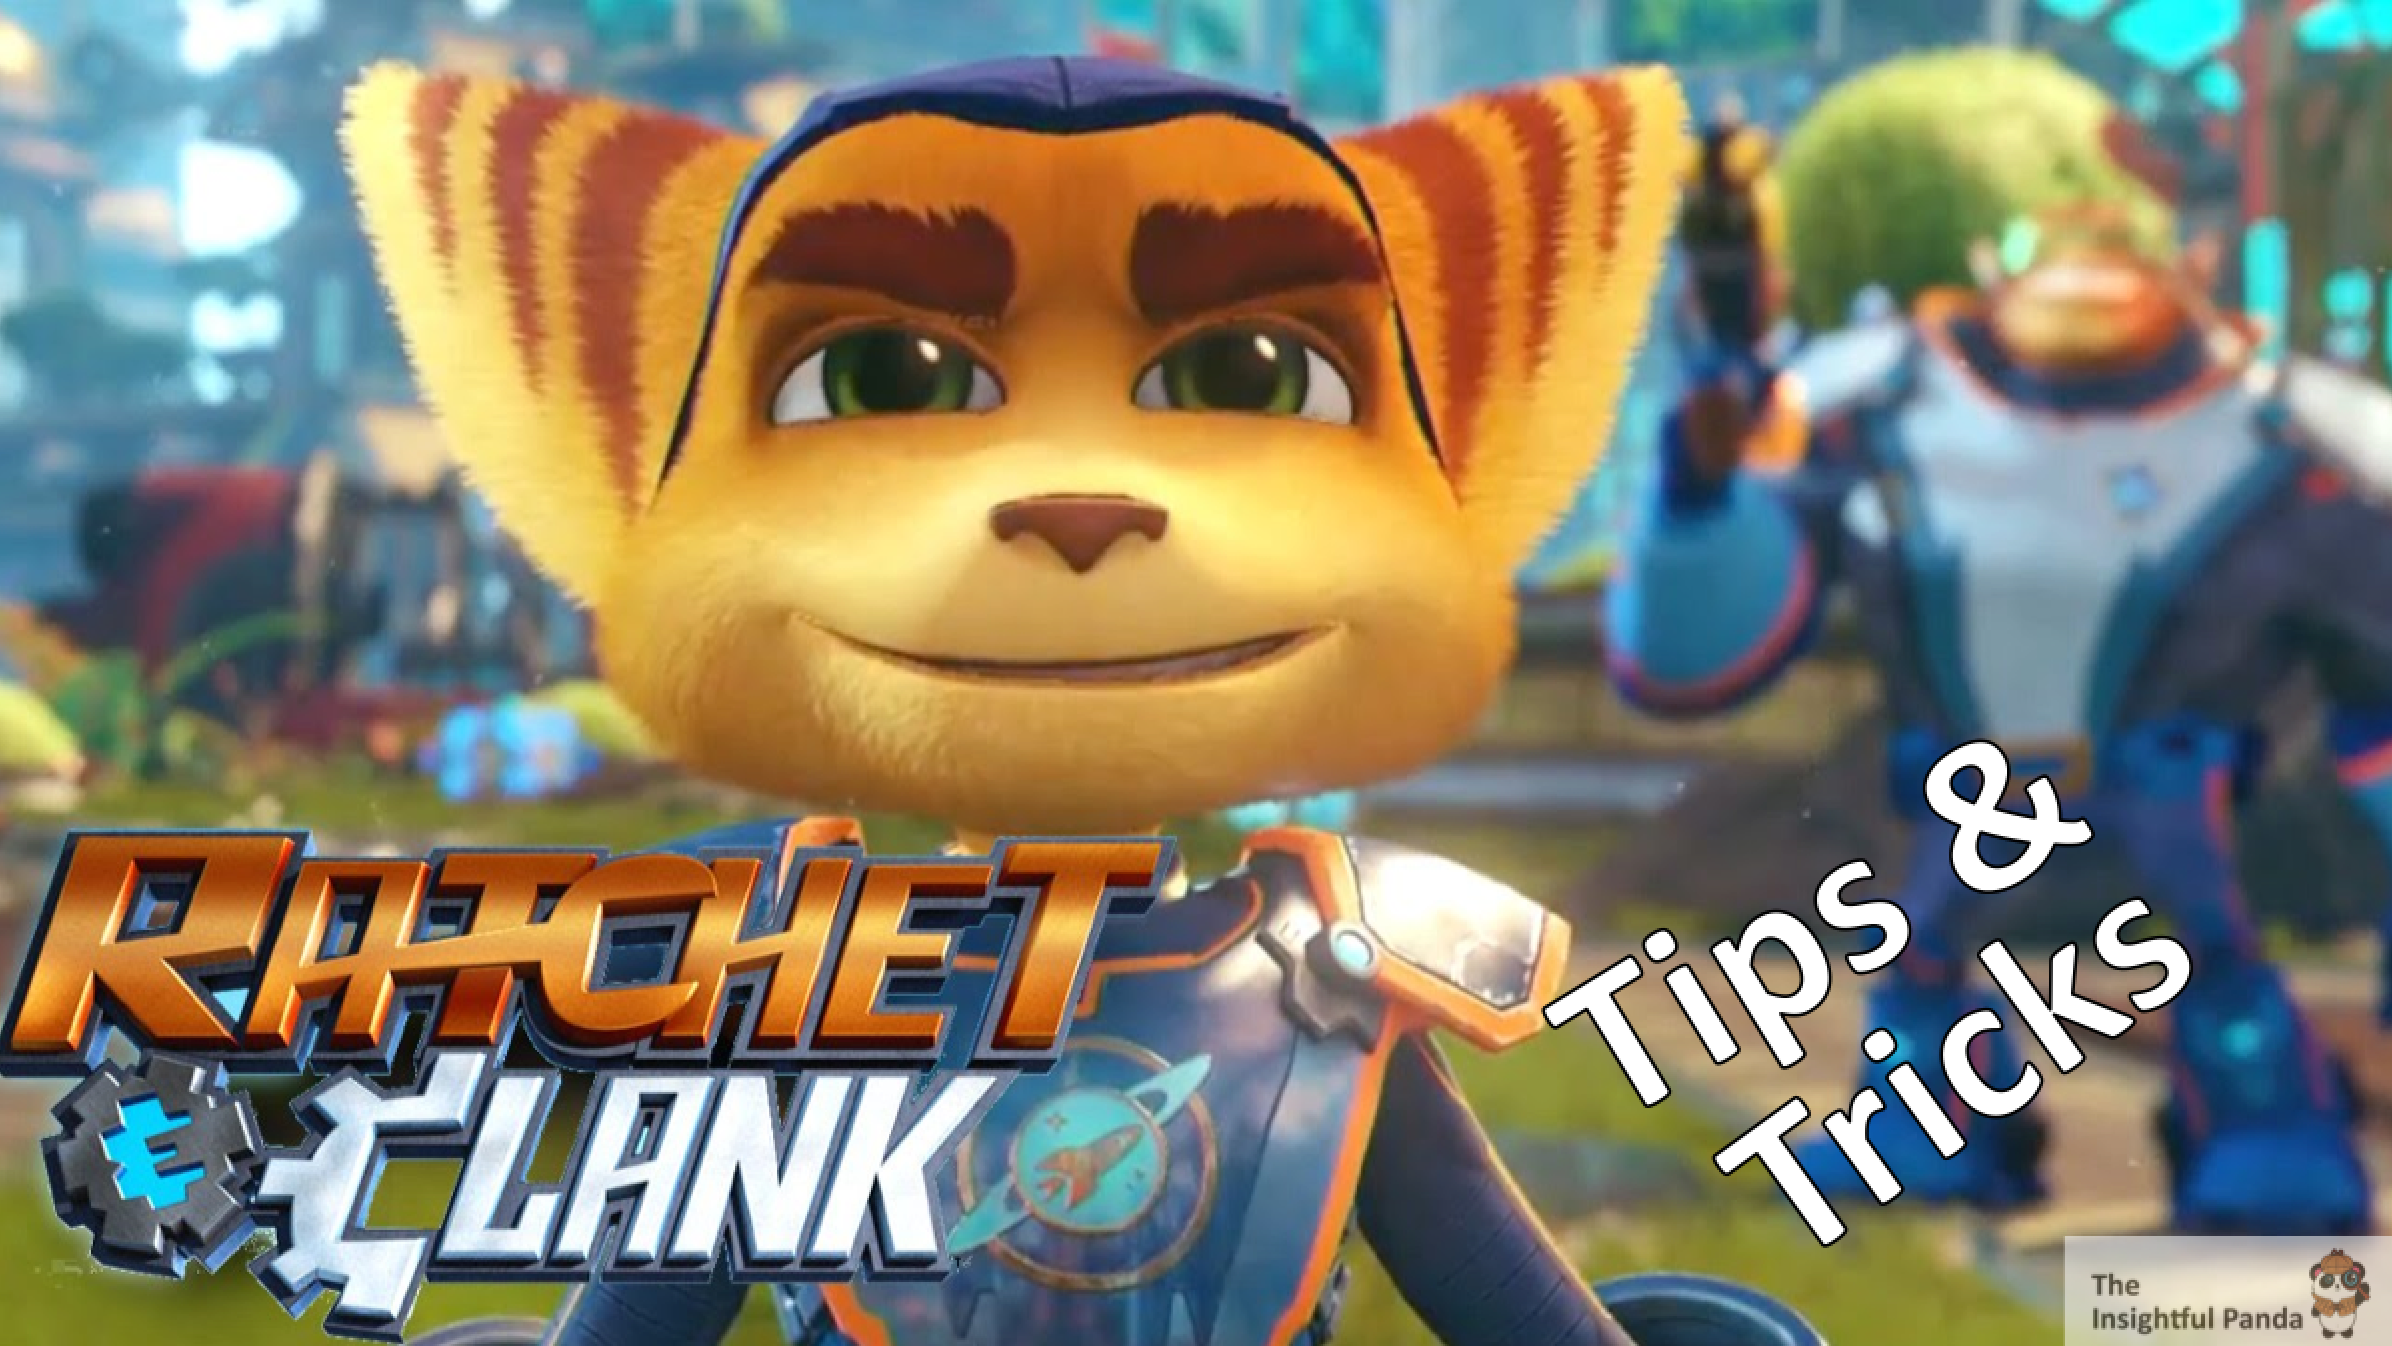 ratchet and clank ps4 walkthrough